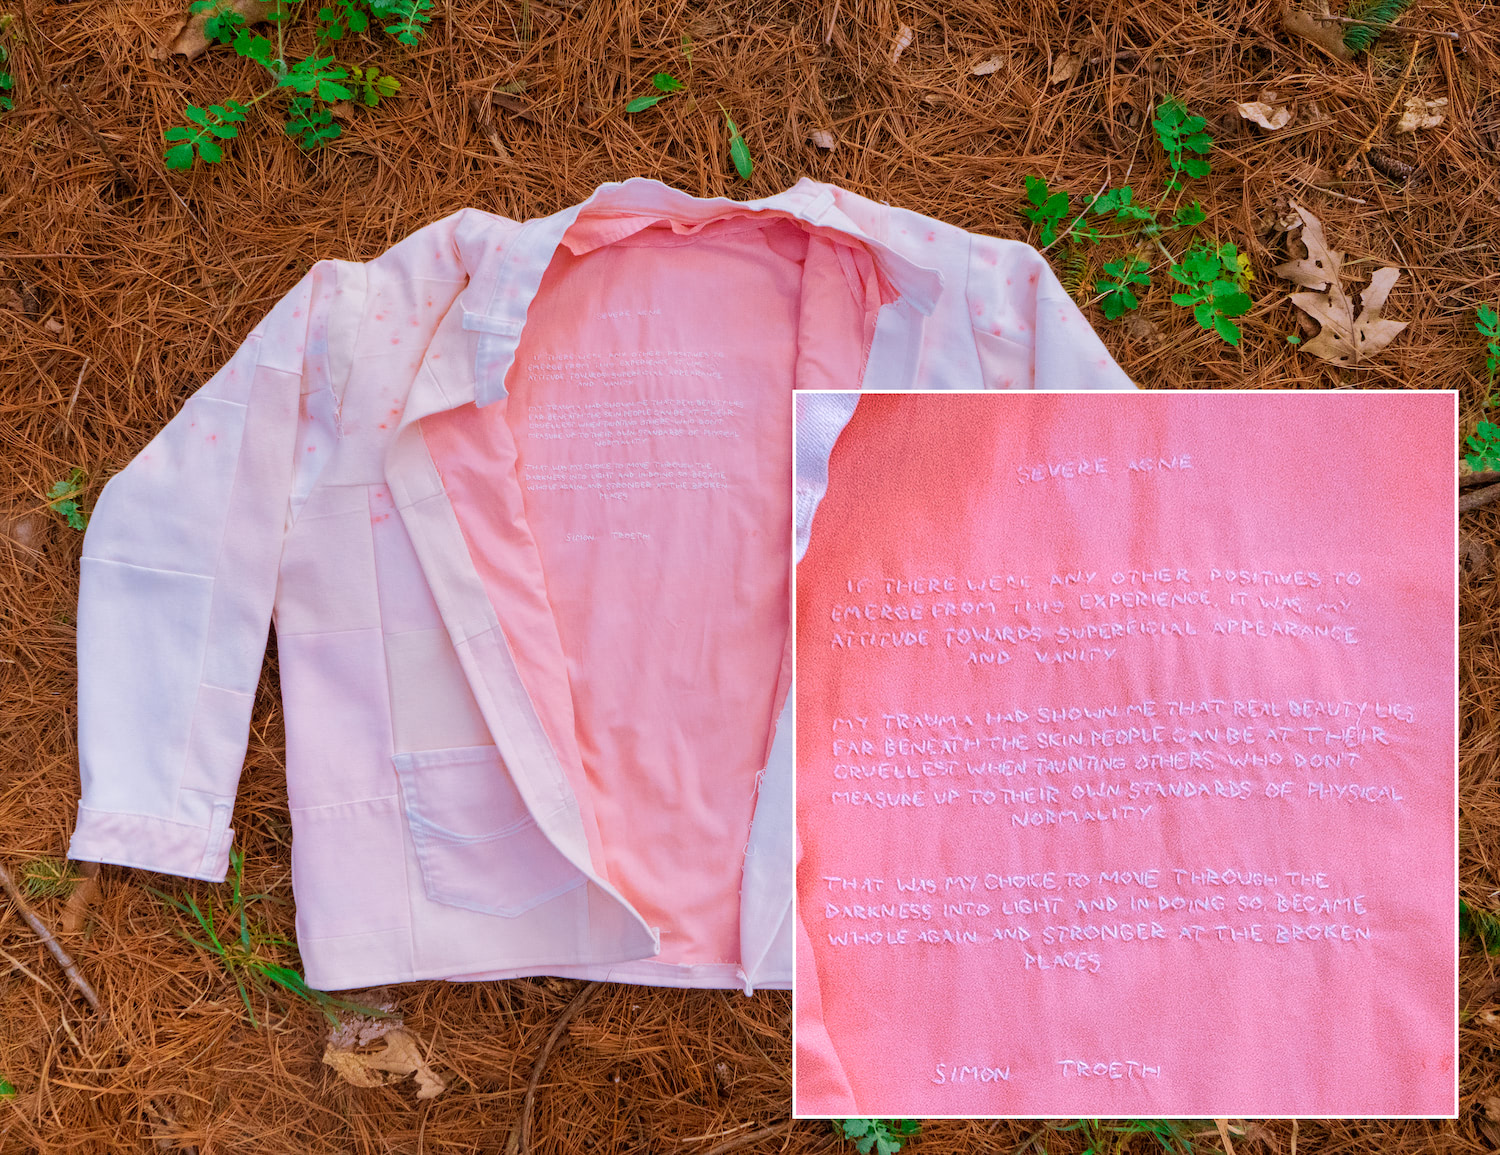 Acne jacket placed on the ground, partially opened